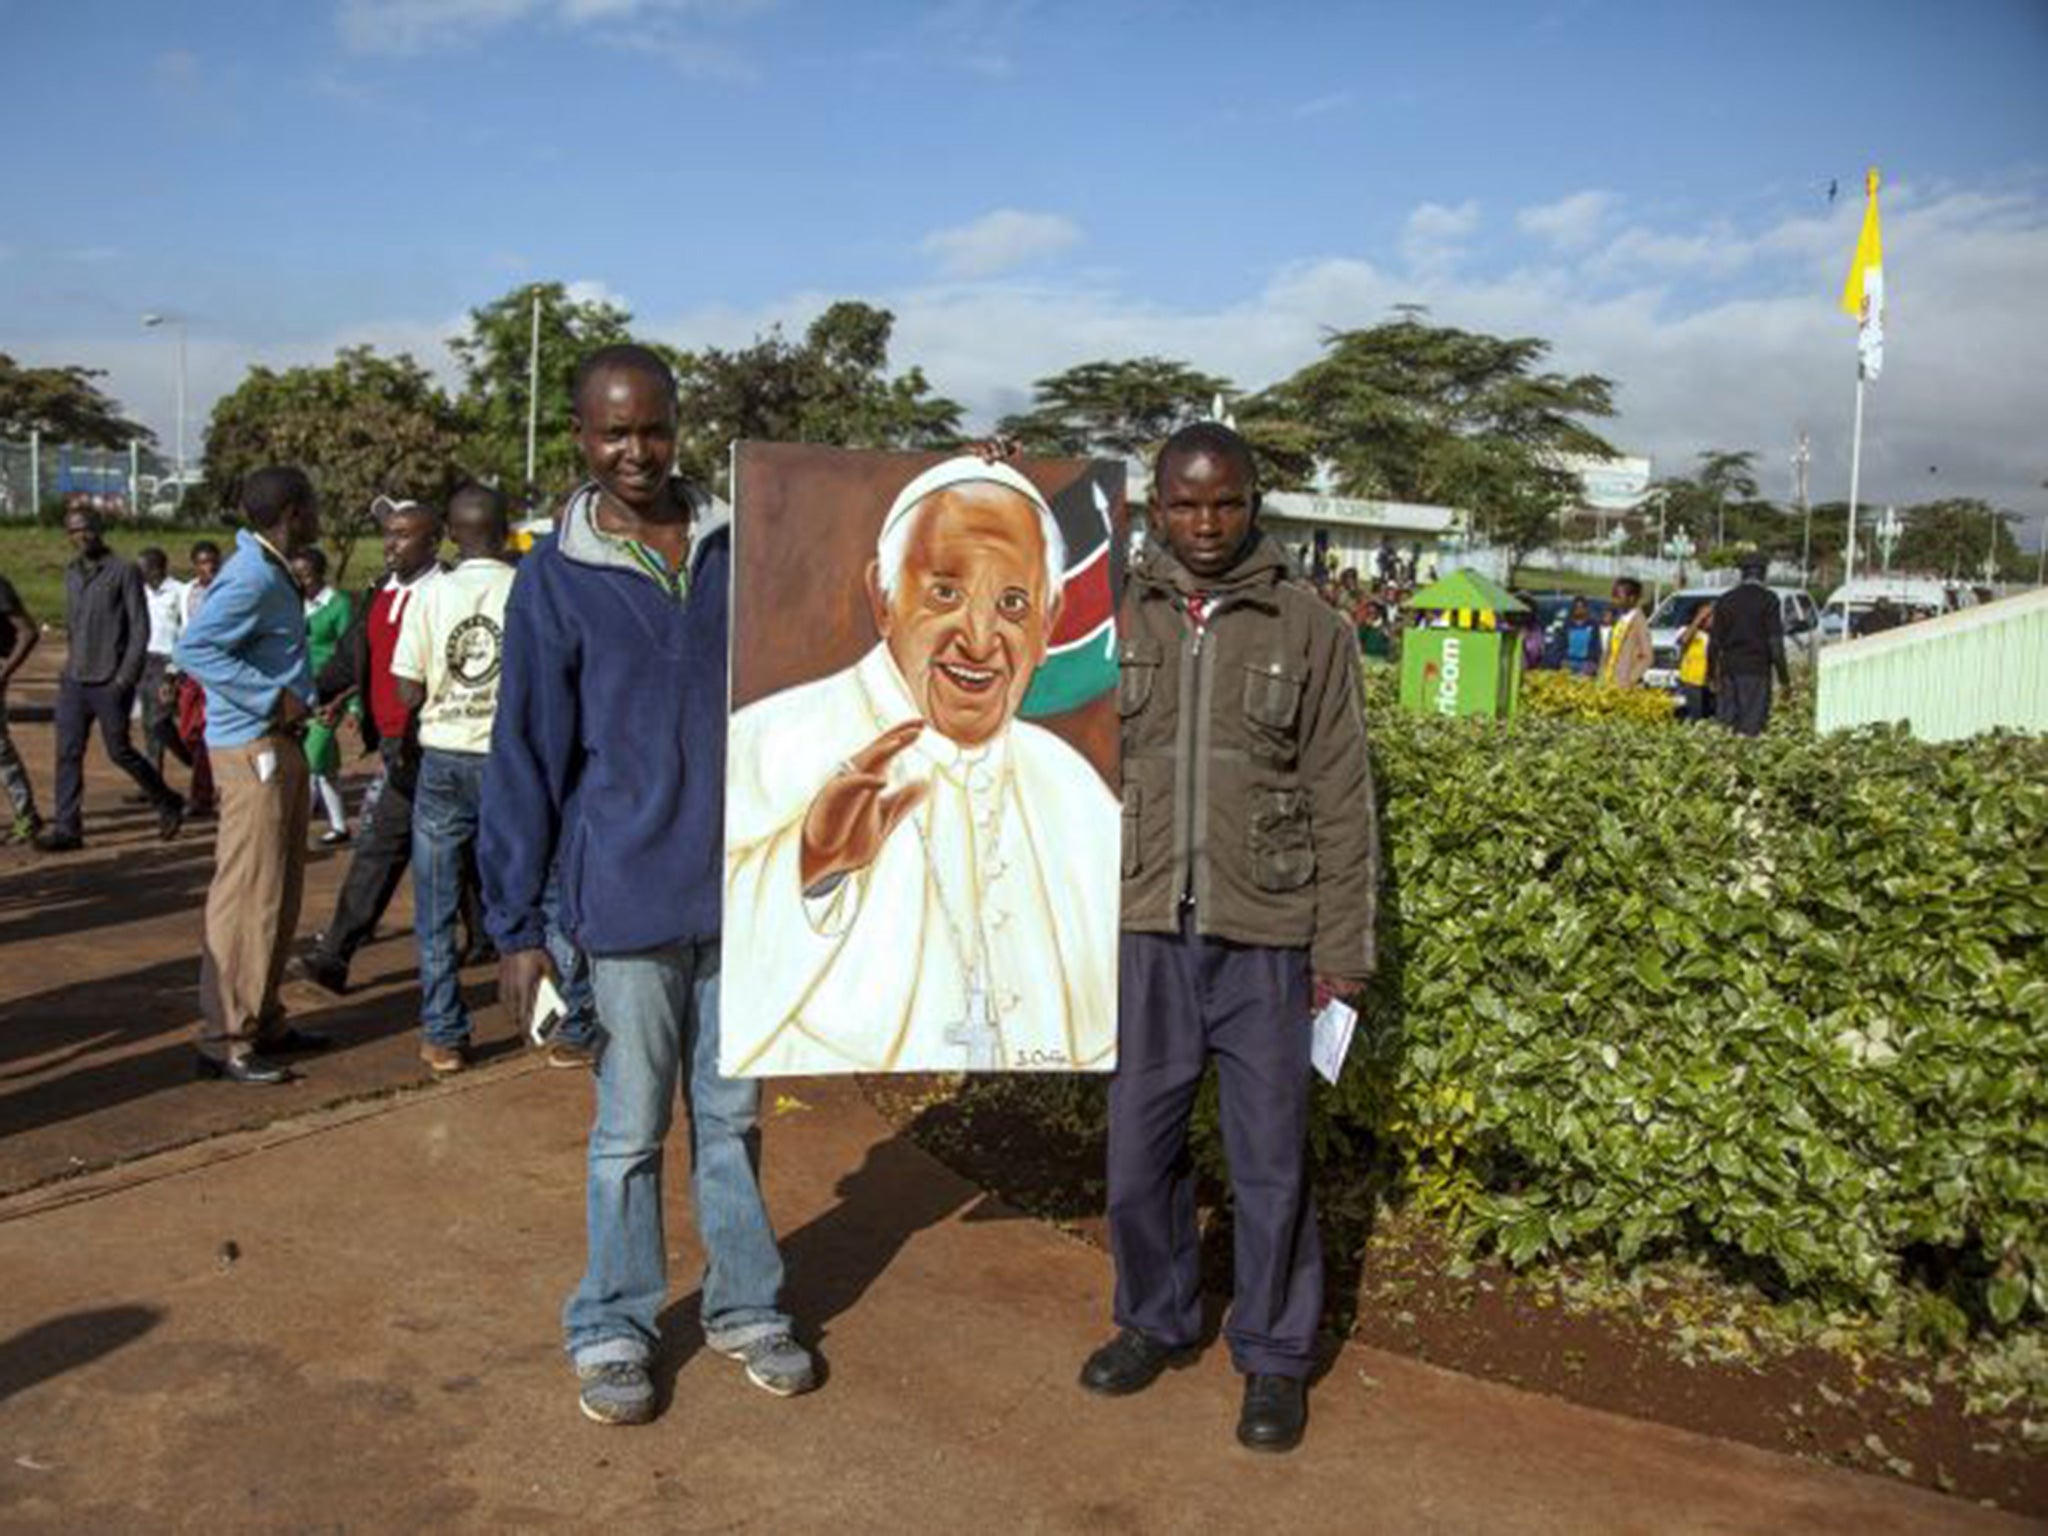 Men holds a portrait of Pope Francis as they gather at the Kasarani Sport Stadium in Nairobi on November 27, 2015